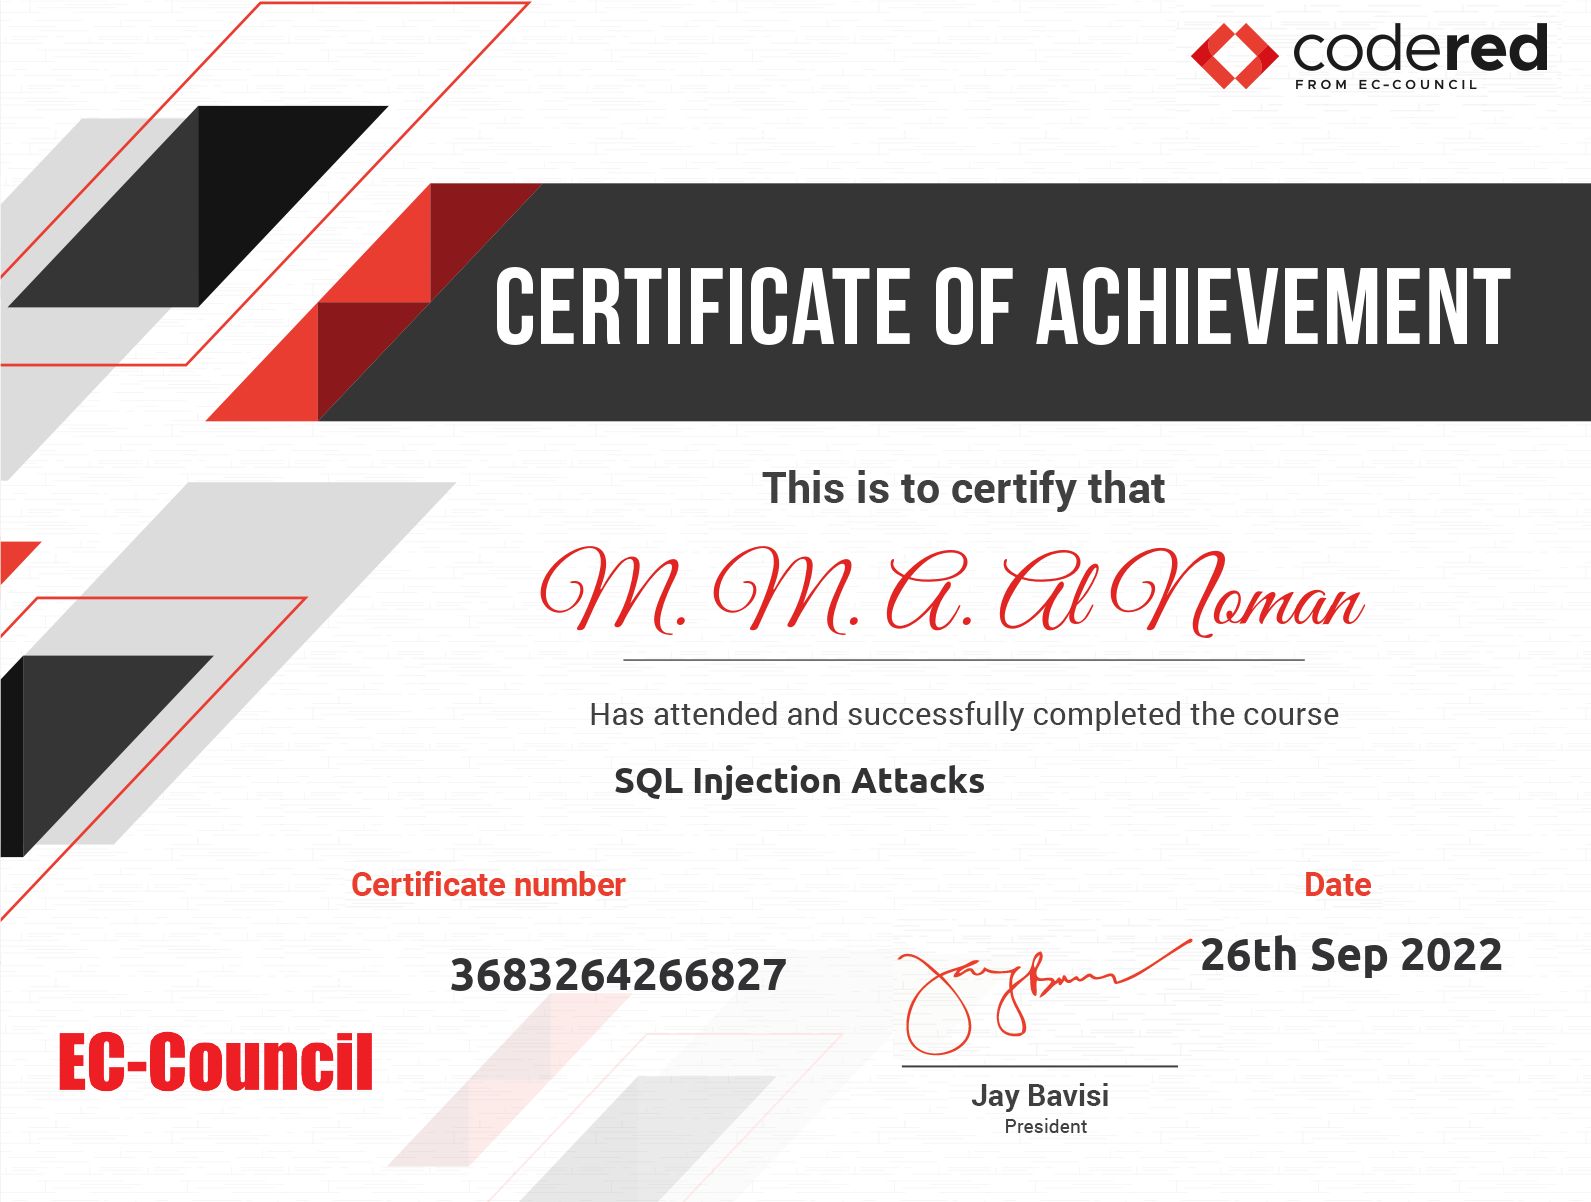 SQL Injection Attacks, Codered EC-Council, 2022